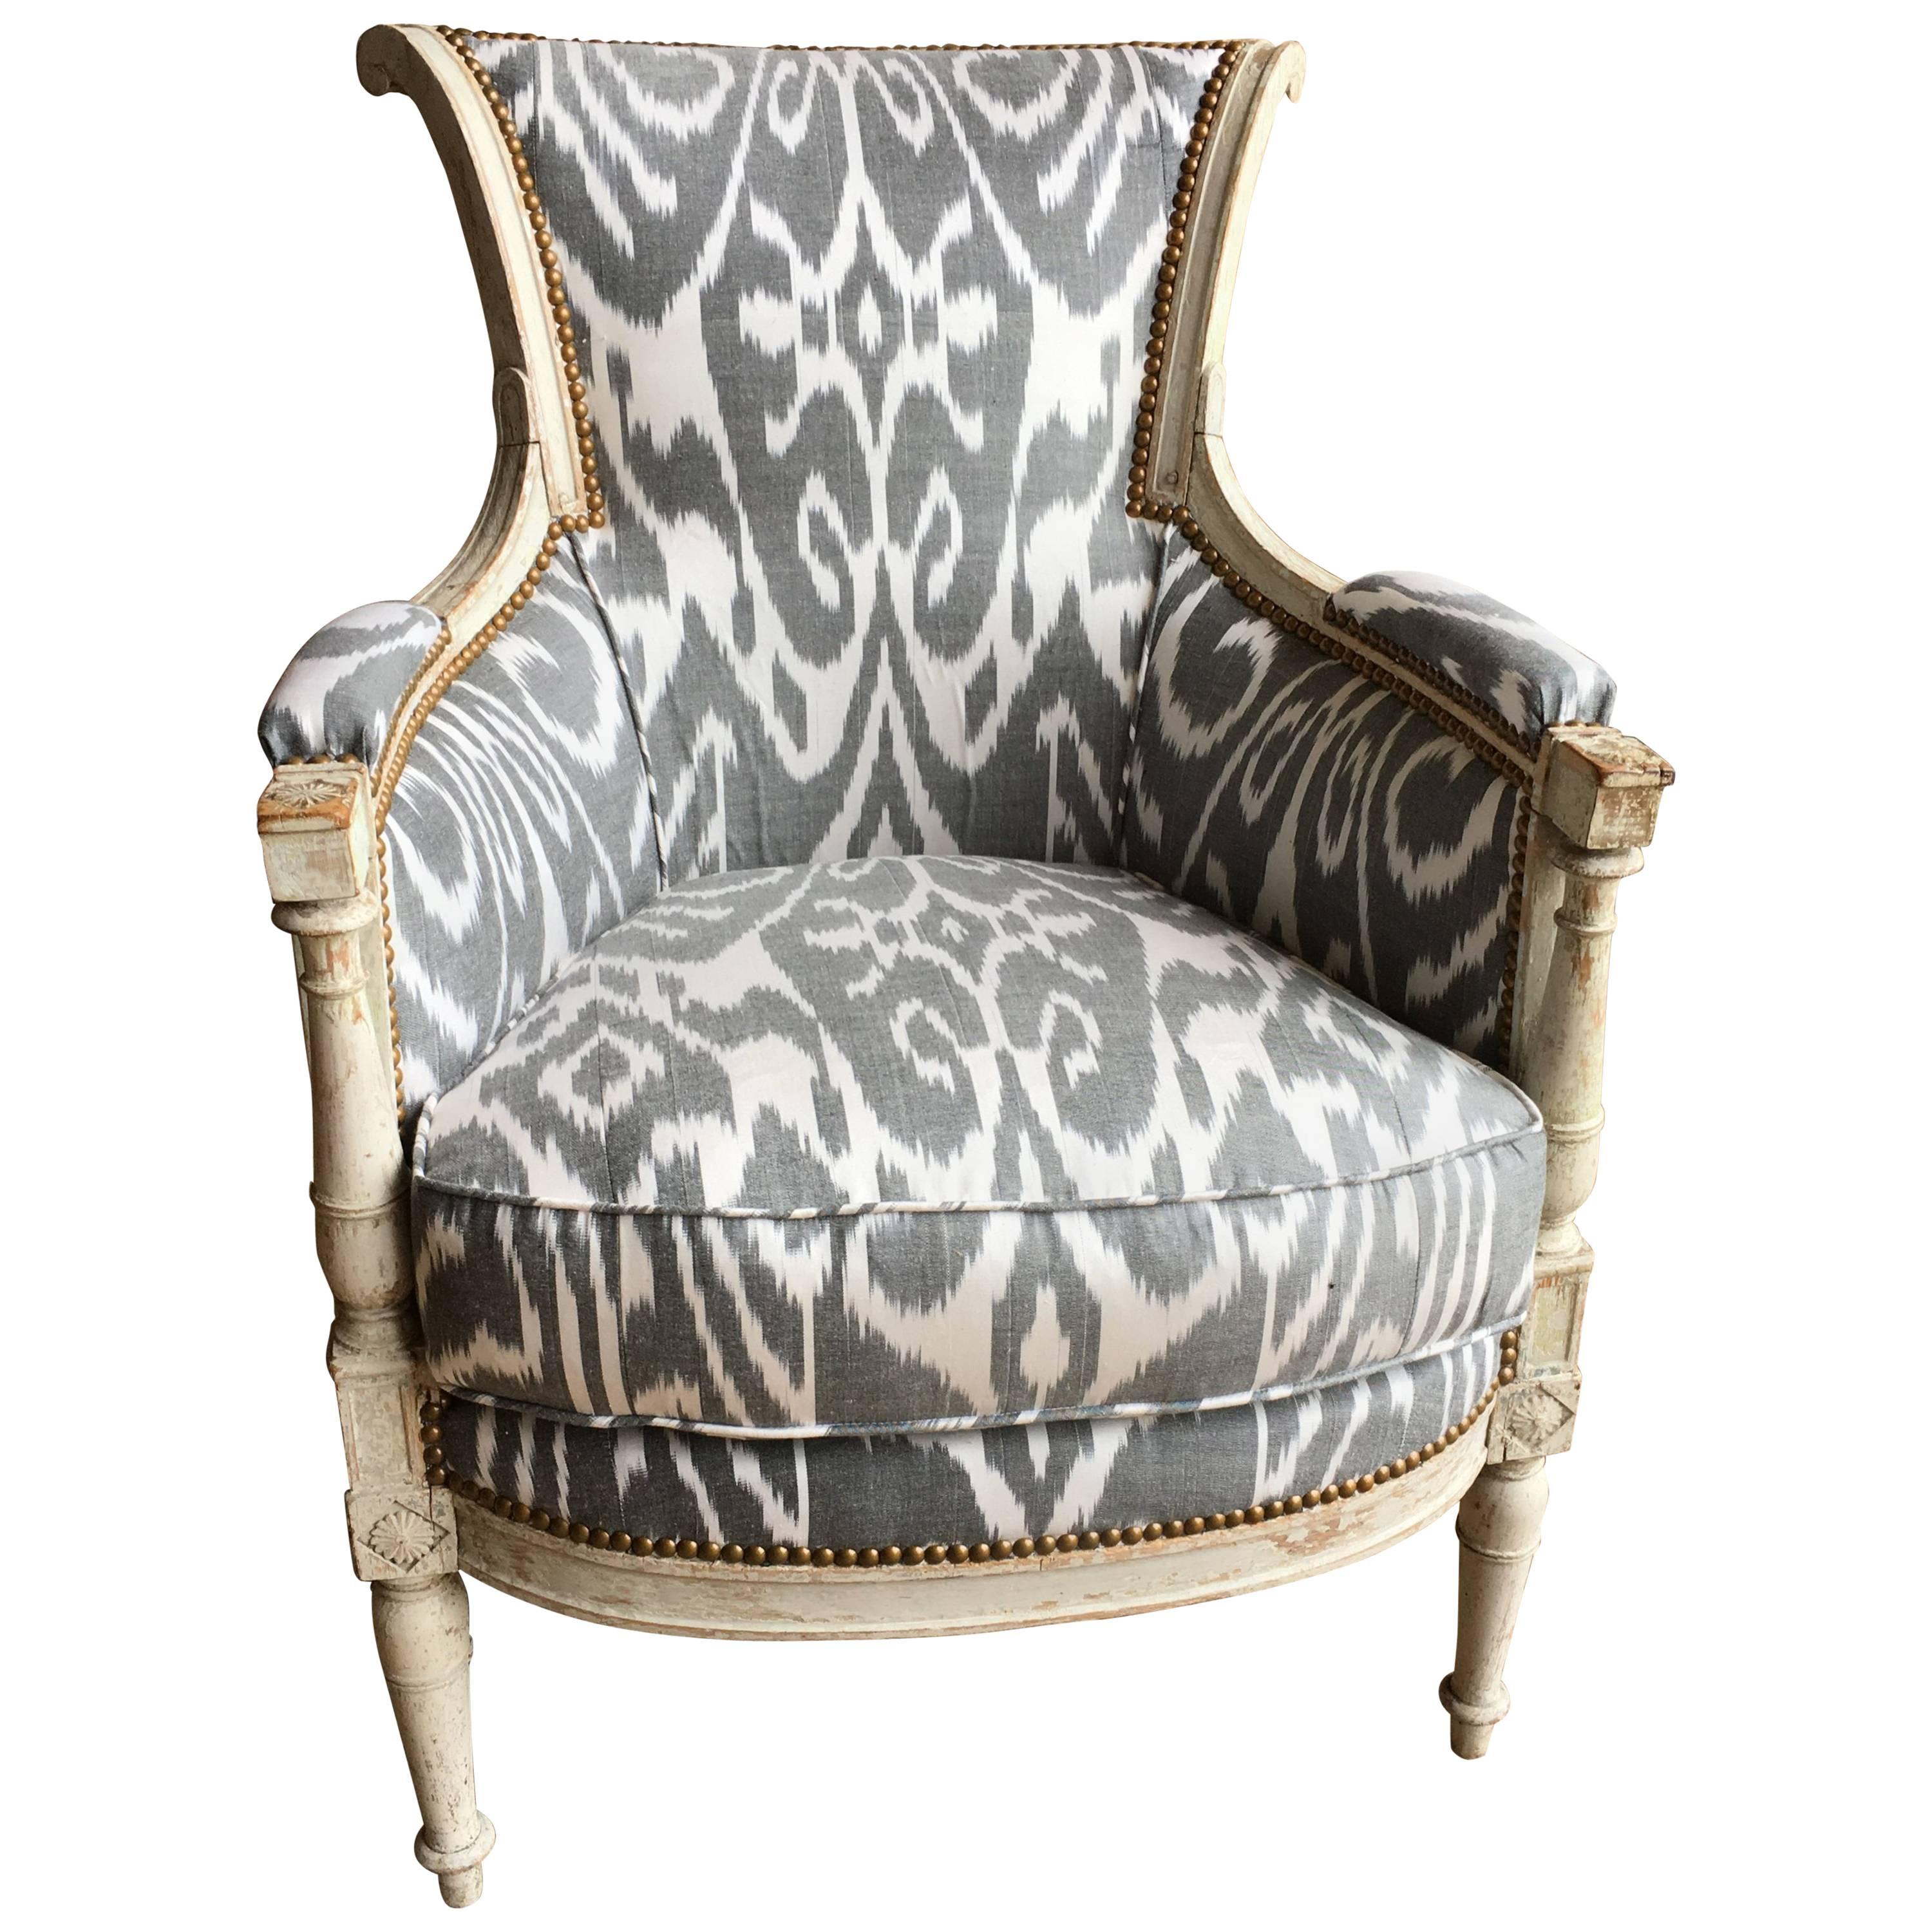 French Directoire Bergere in Ikat Fabric, circa 1800